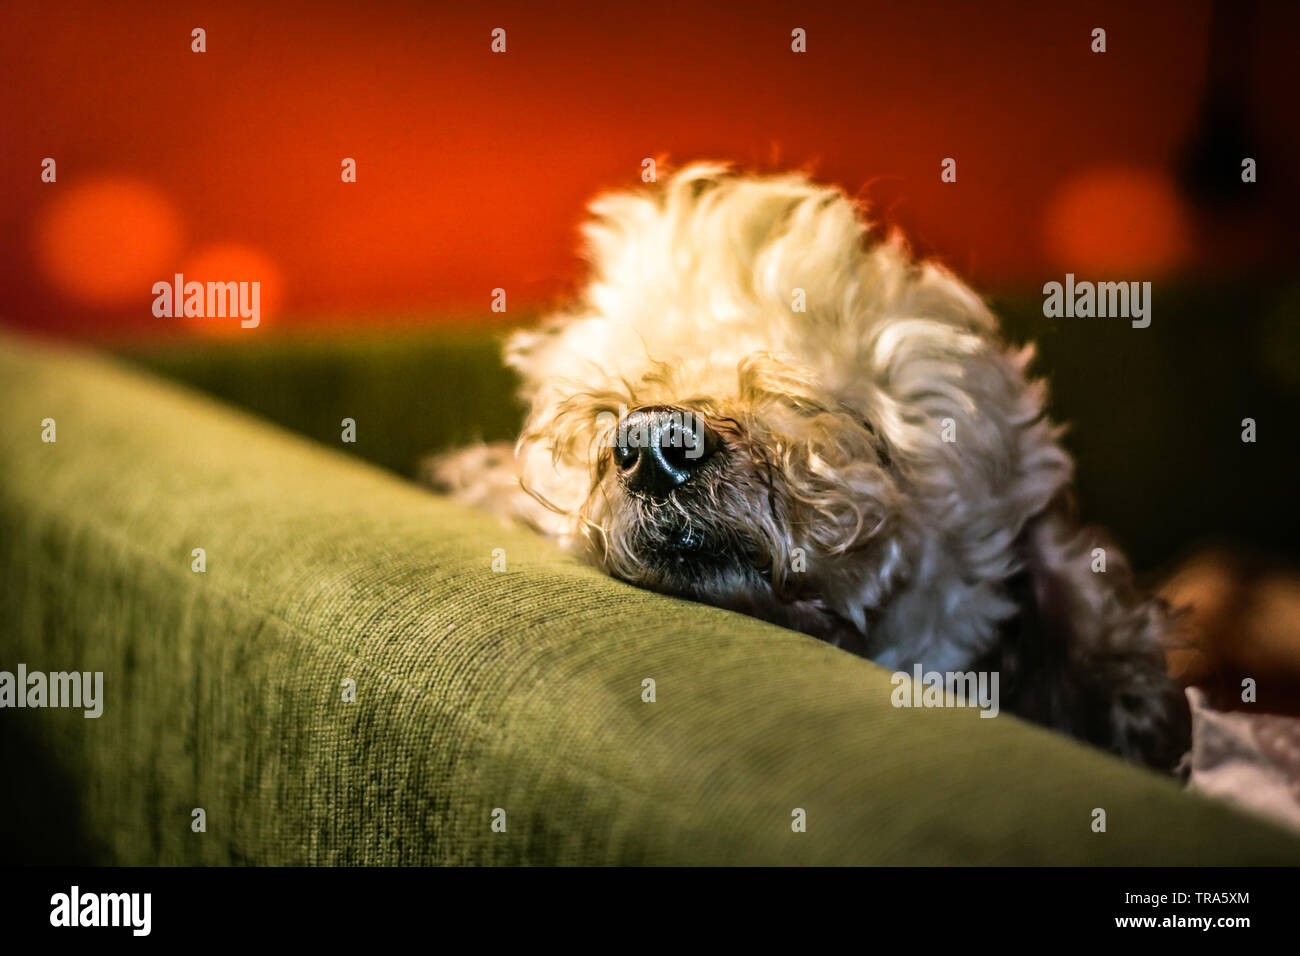 Funny little poodle laying on the bed. Stock Photo